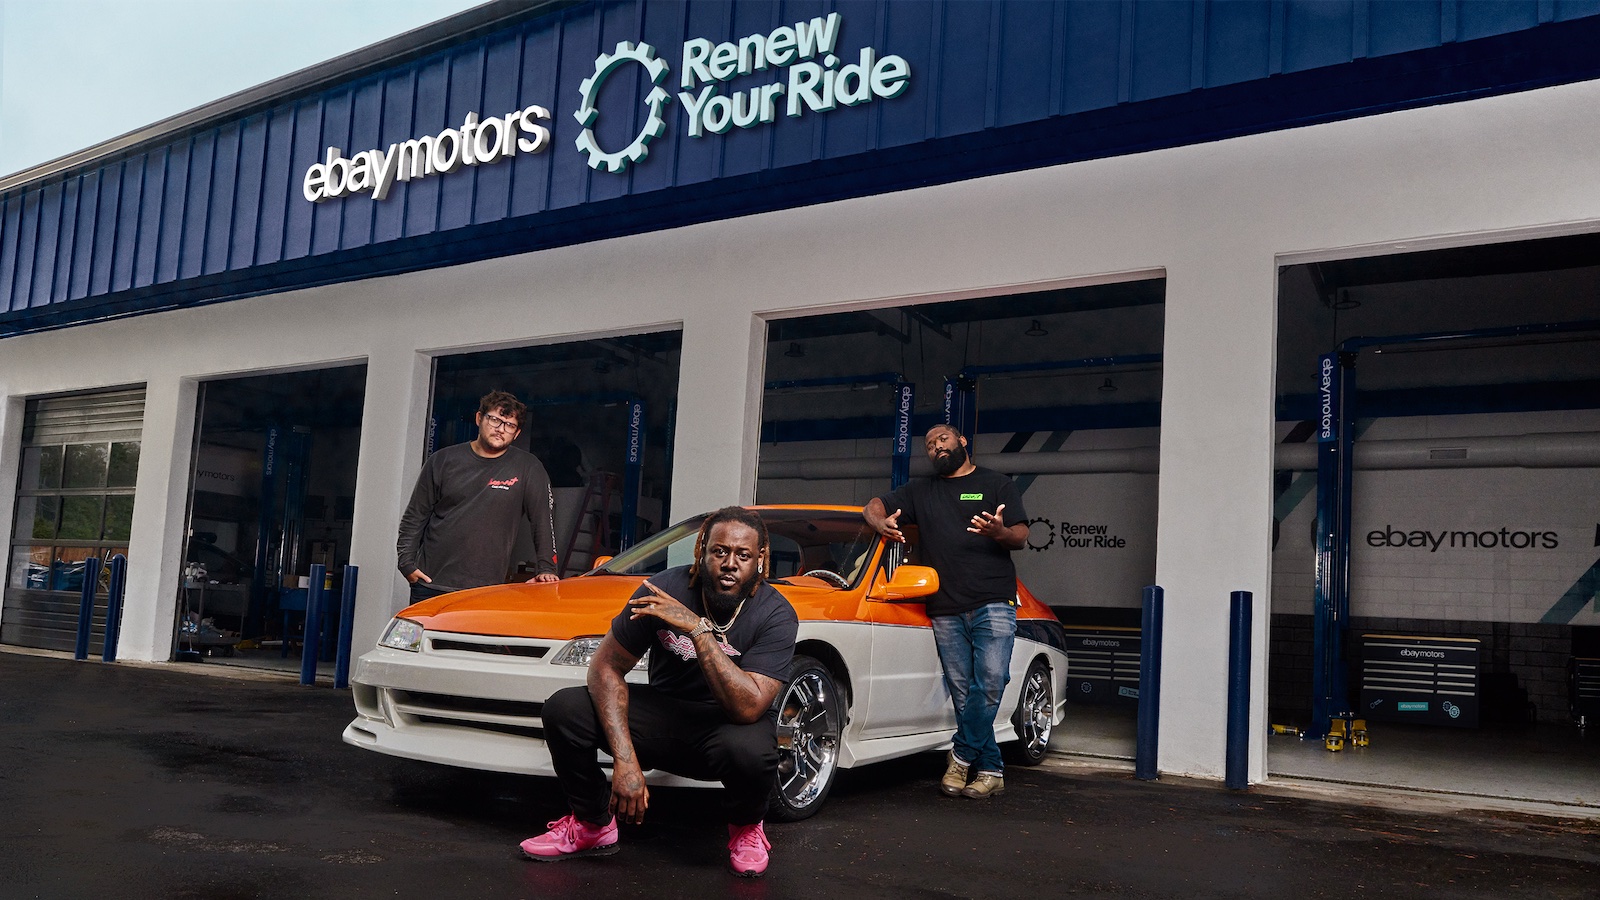 What Happened to the T-Pain Drift Car? Here's the Full Story!